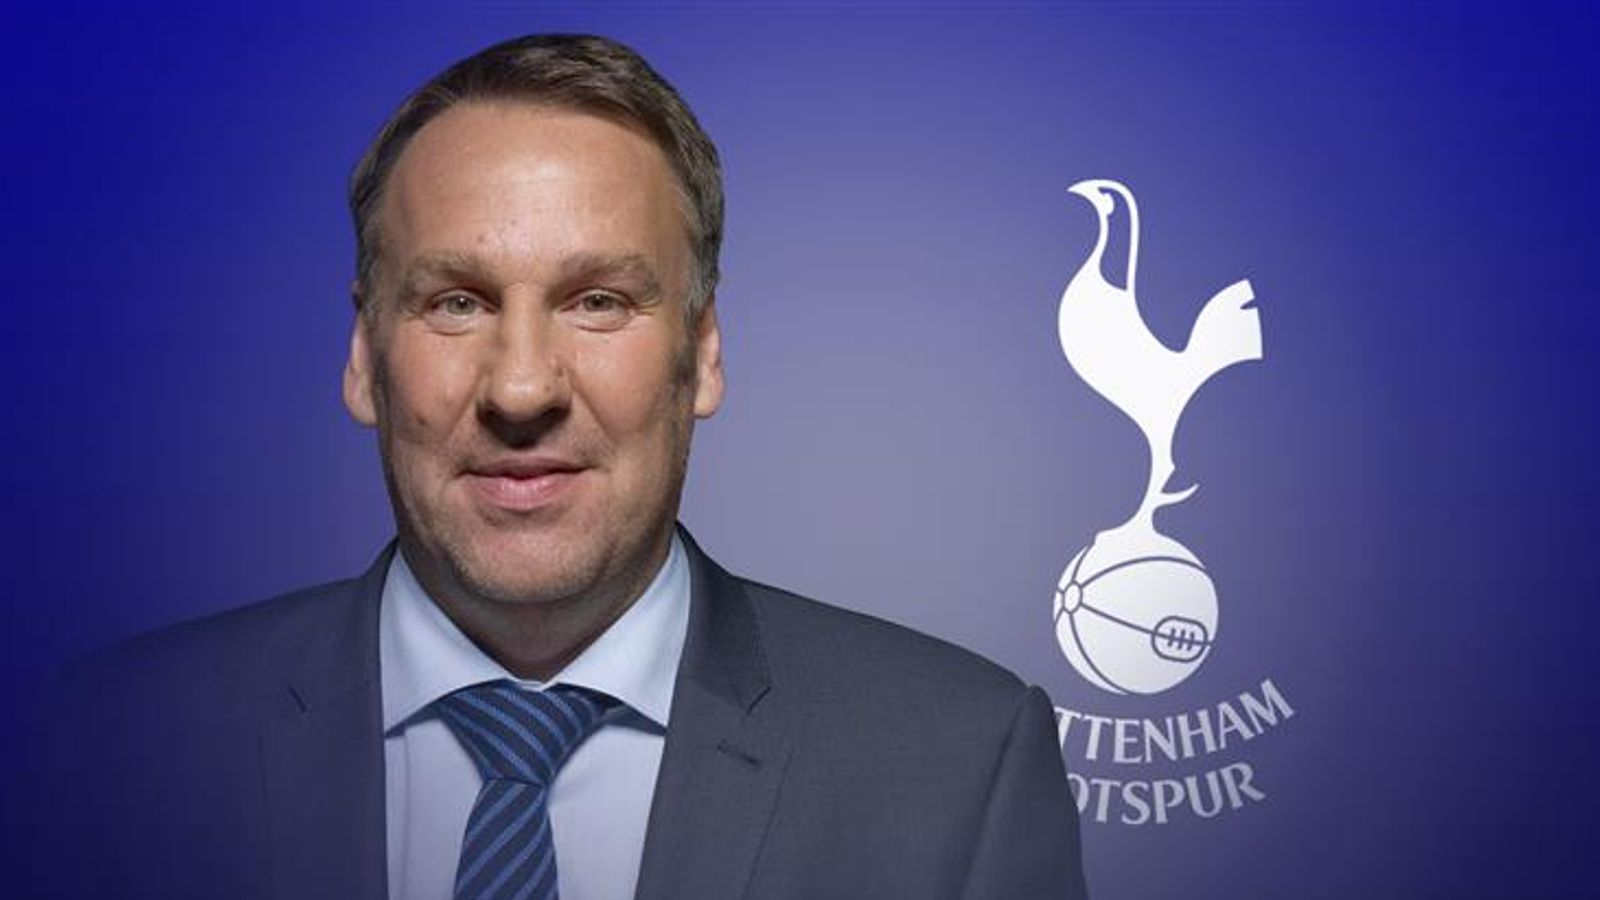 Tottenham favourites for top four but they're a one-man team, says Paul Merson